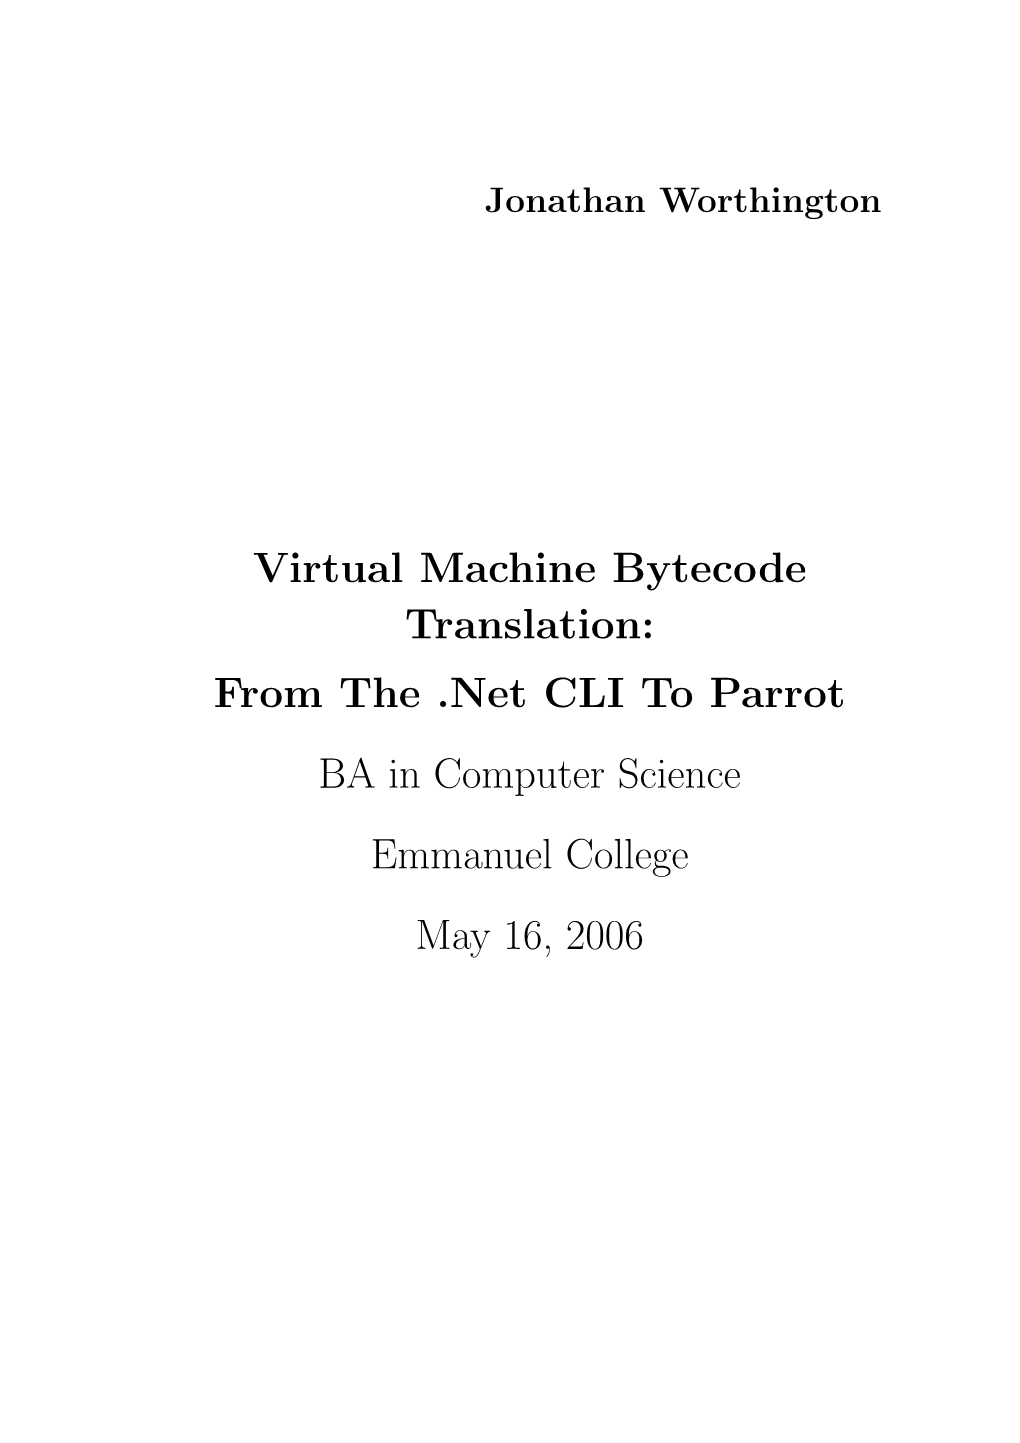 Virtual Machine Bytecode Translation: from the .Net CLI to Parrot BA in Computer Science Emmanuel College May 16, 2006